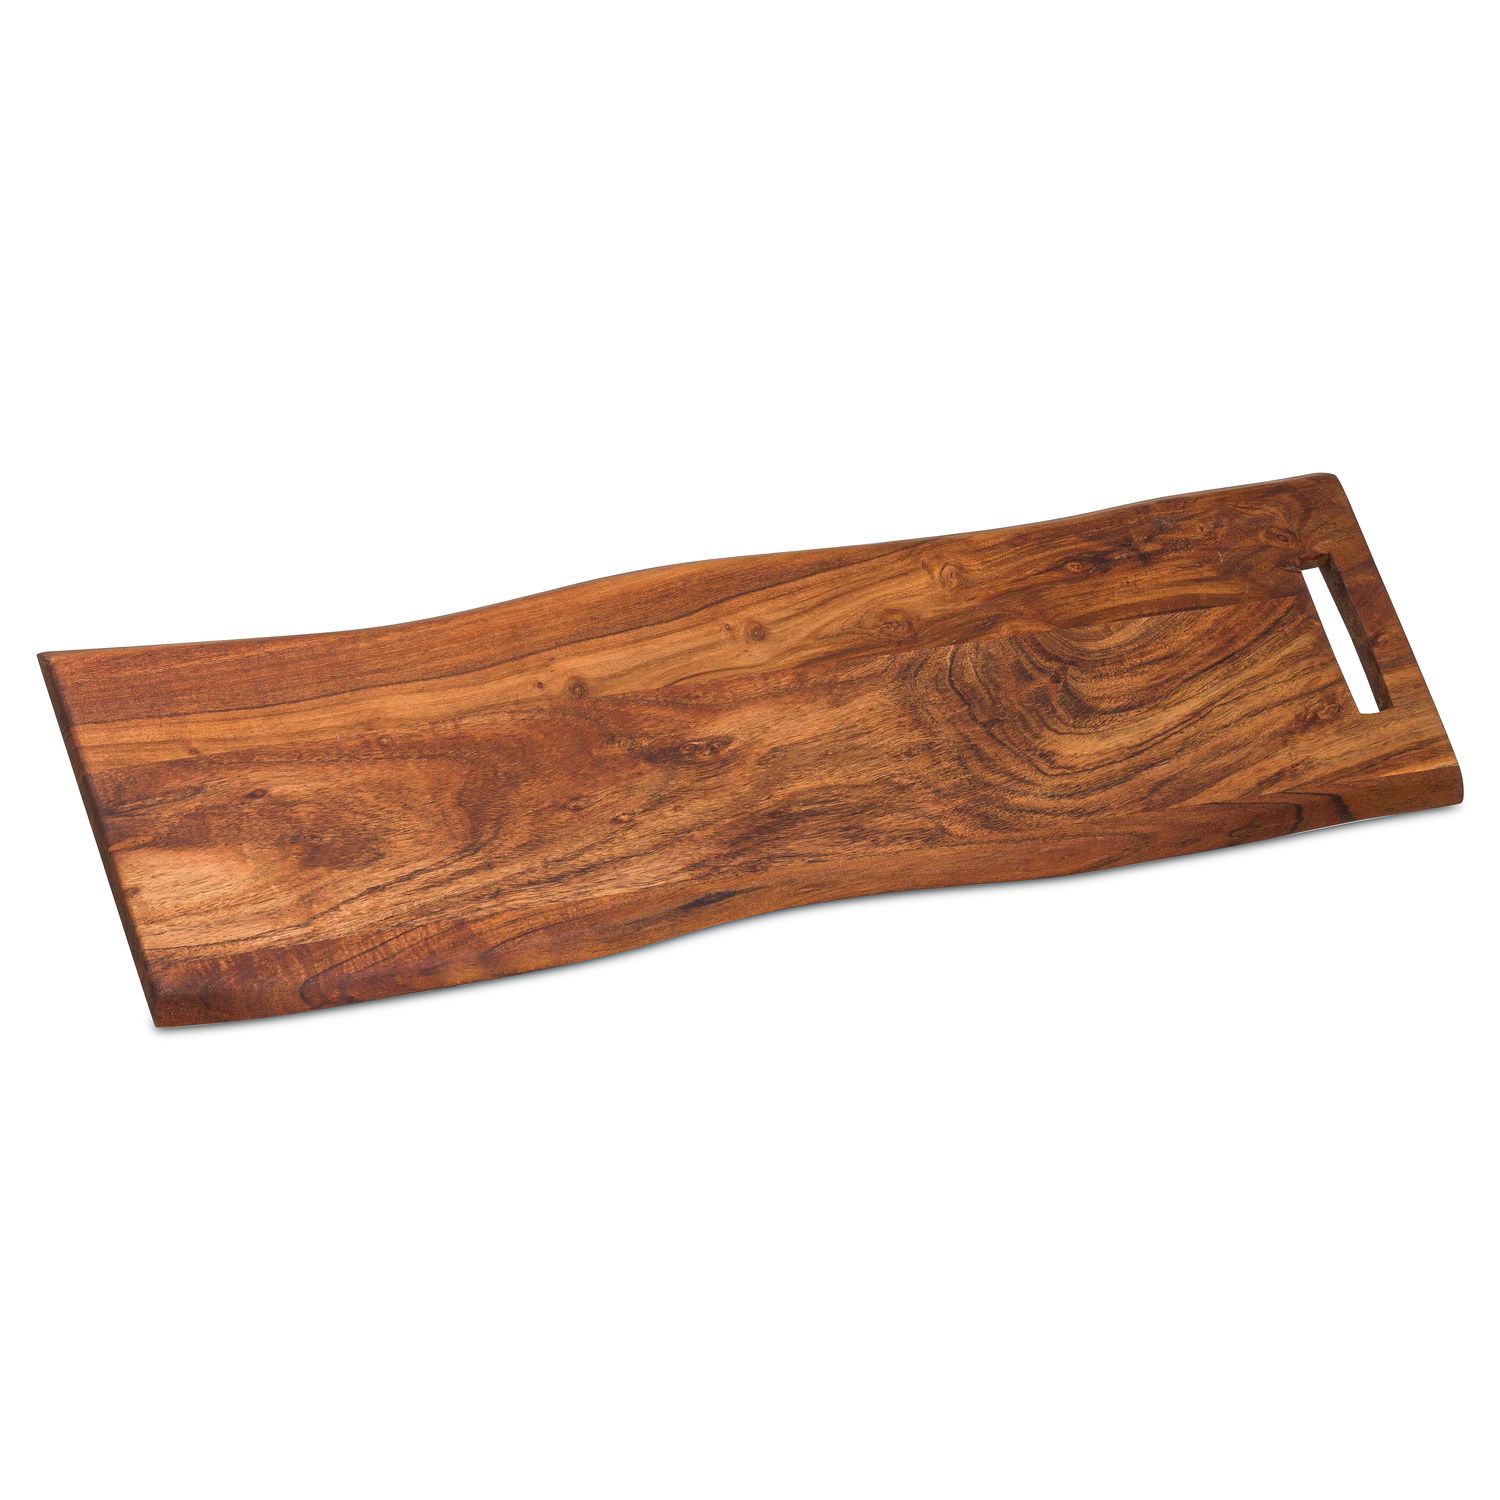 Live Edge Chopping Board With Handle - Image 1